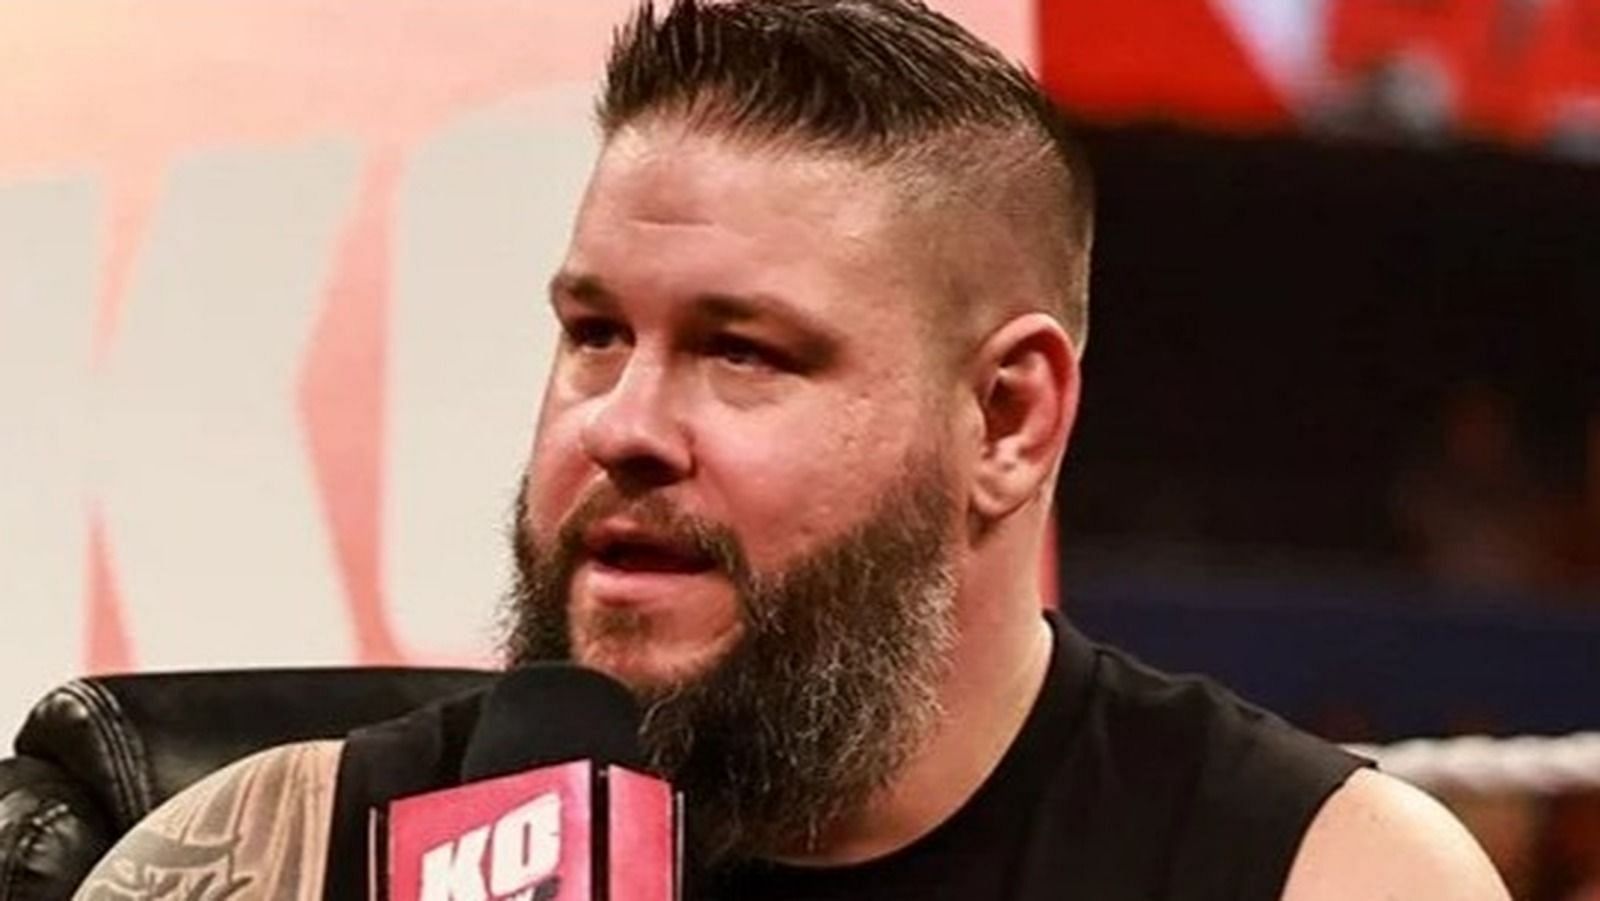 Kevin Owens cut a fiery promo on a former world champion recently